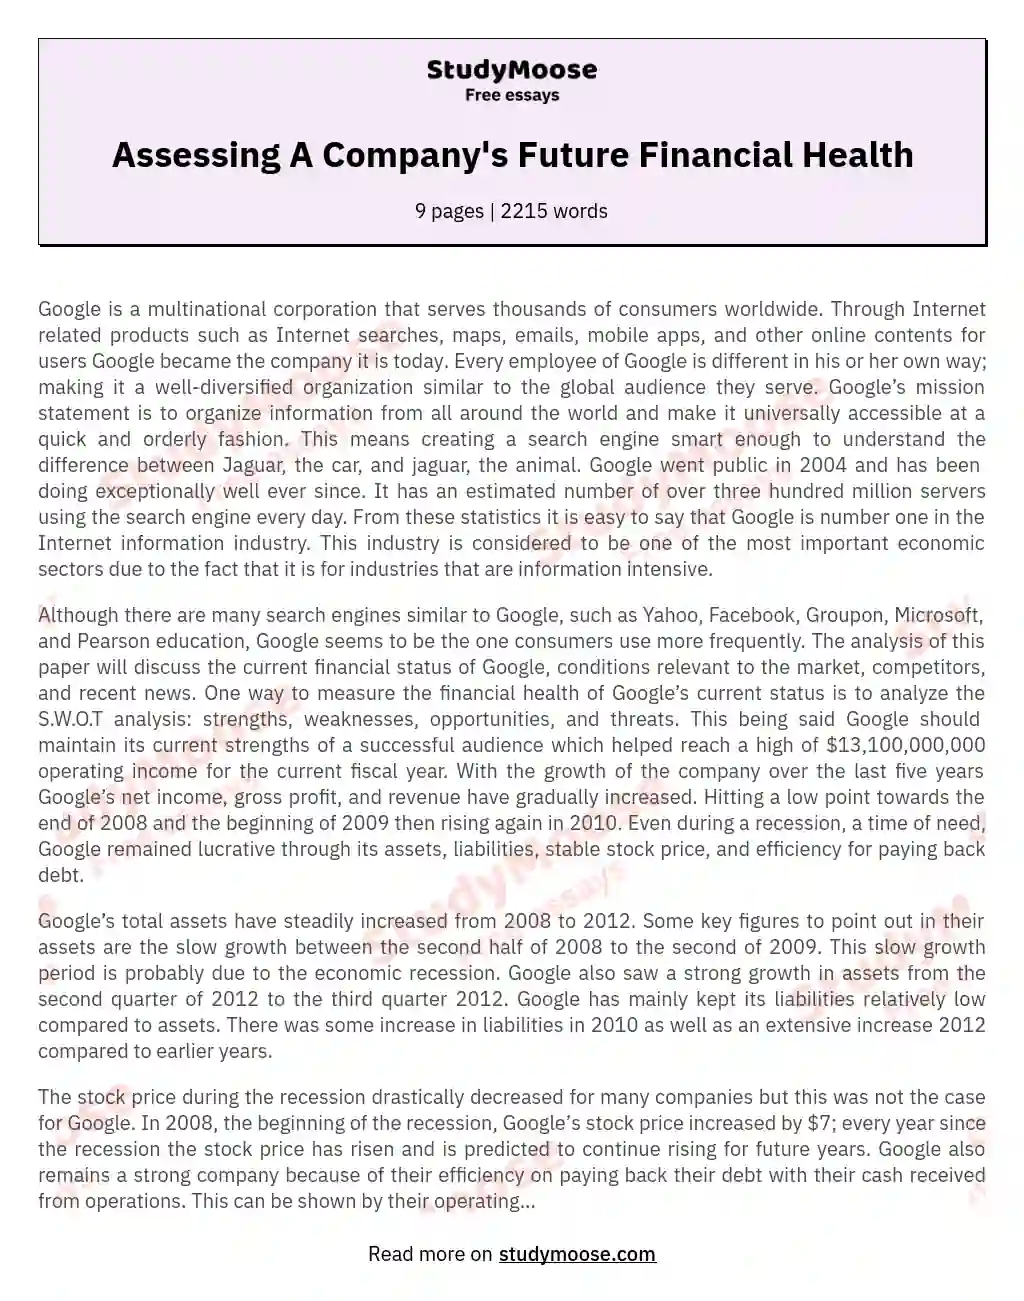 Assessing A Company's Future Financial Health